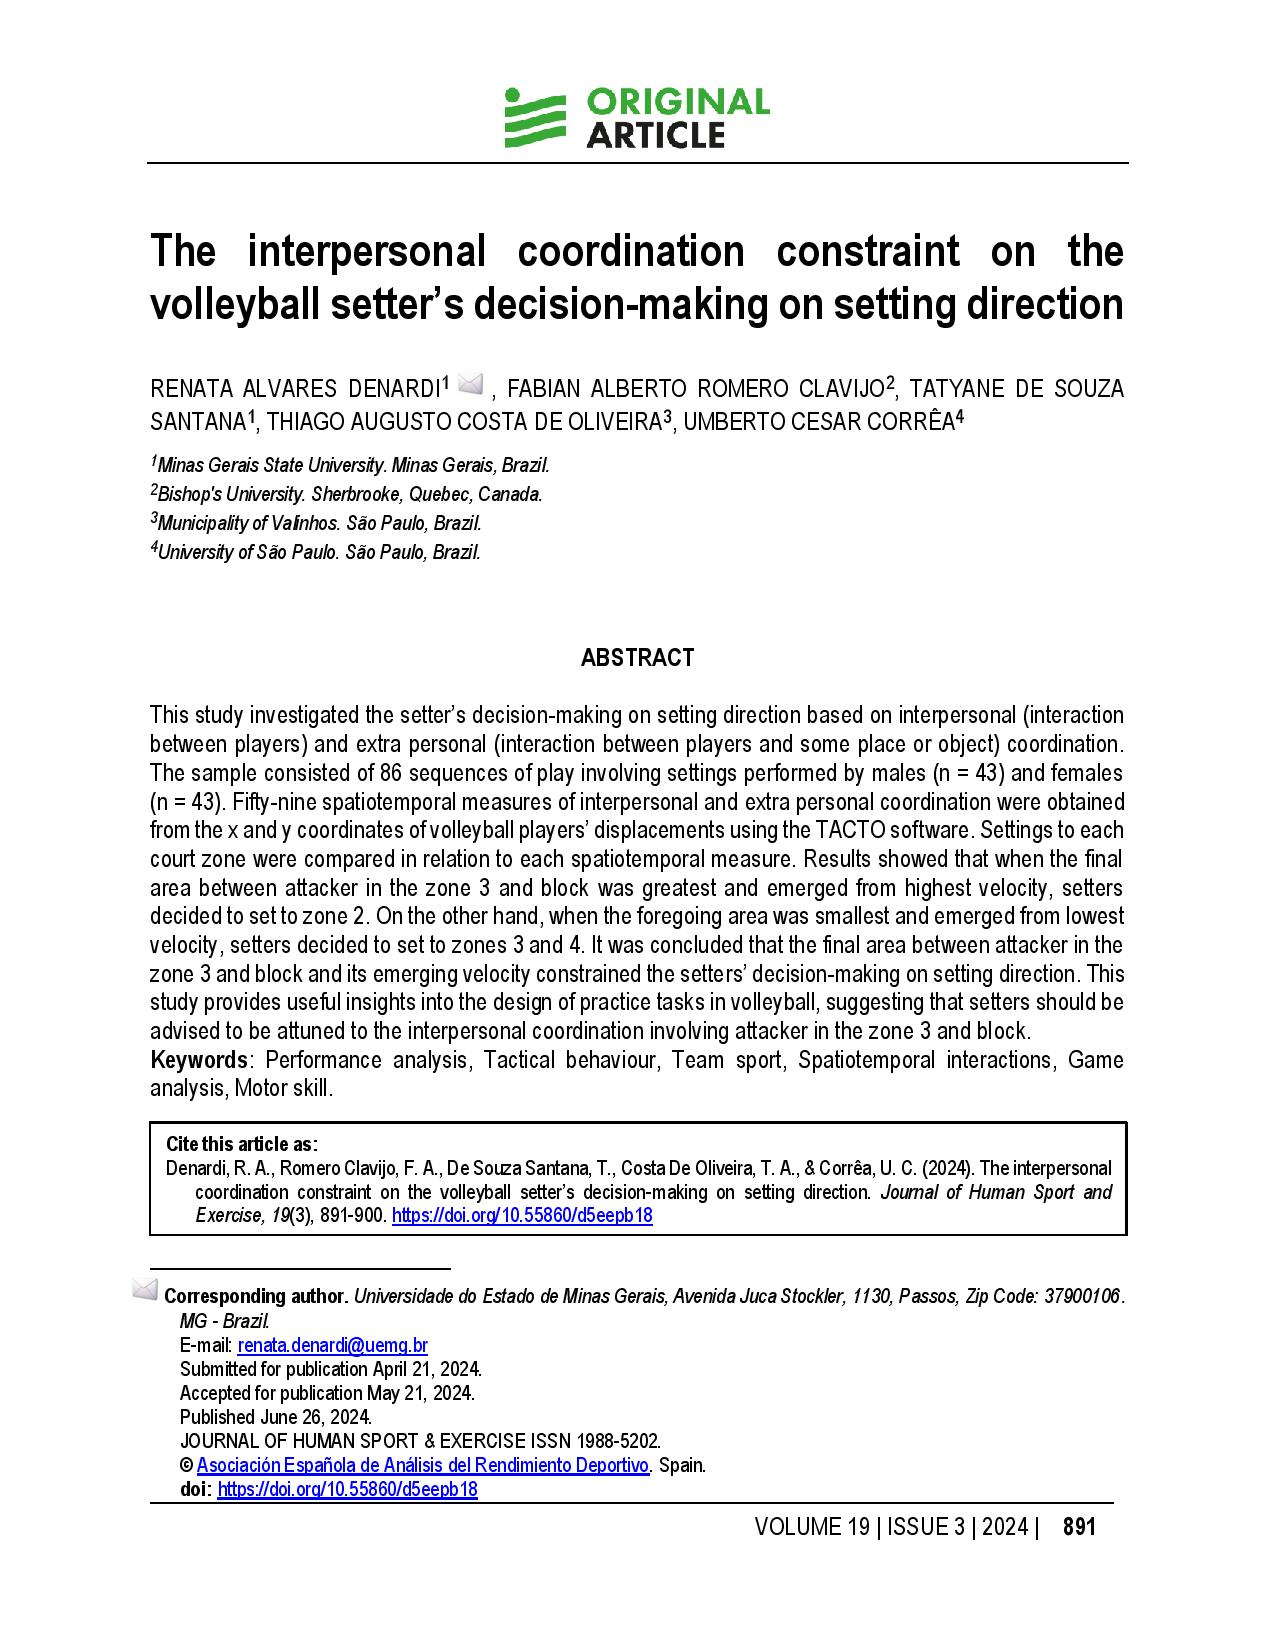 The interpersonal coordination constraint on the volleyball setter’s decision-making on setting direction